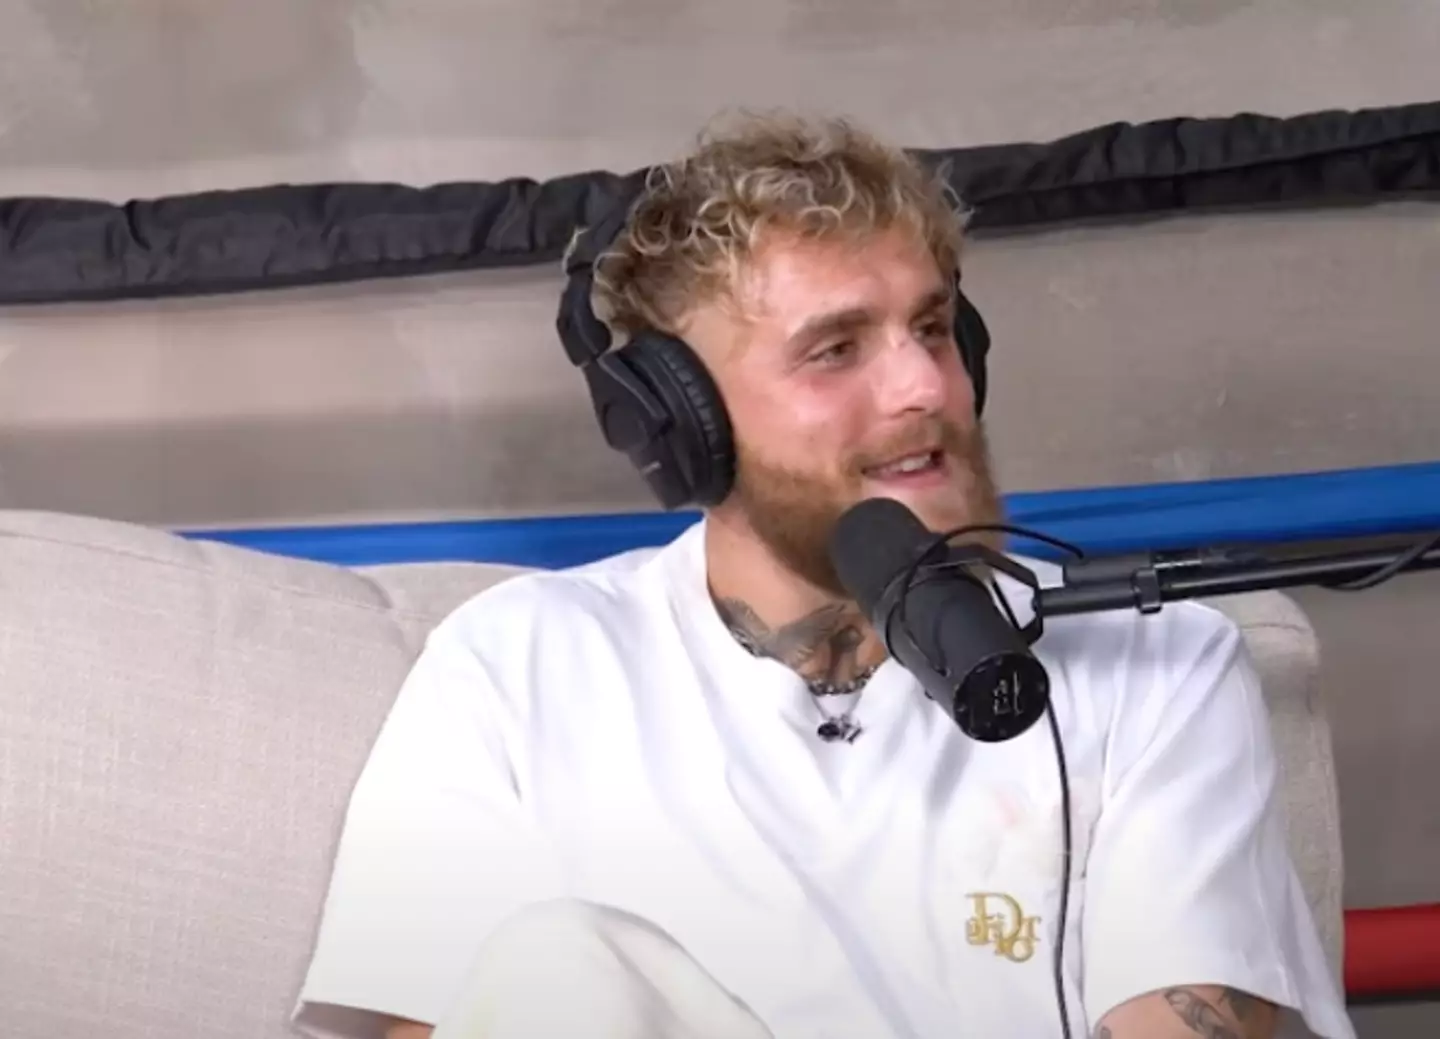 Logan Paul questioned whether his brother's wet dream had an impact on his performance against Fury.